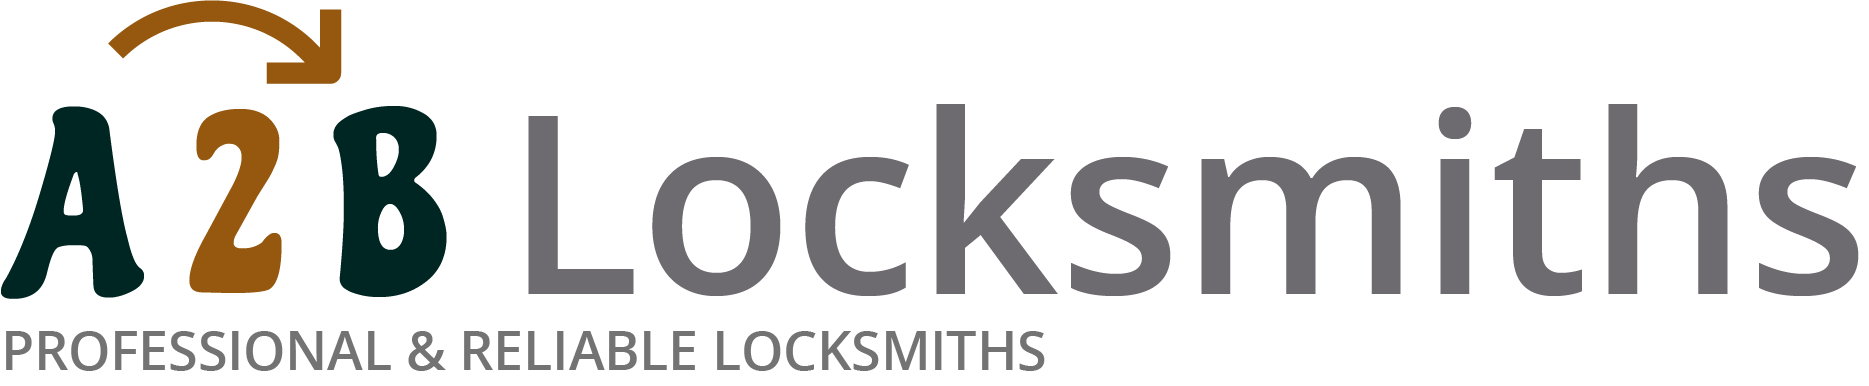 If you are locked out of house in Basingstoke, our 24/7 local emergency locksmith services can help you.